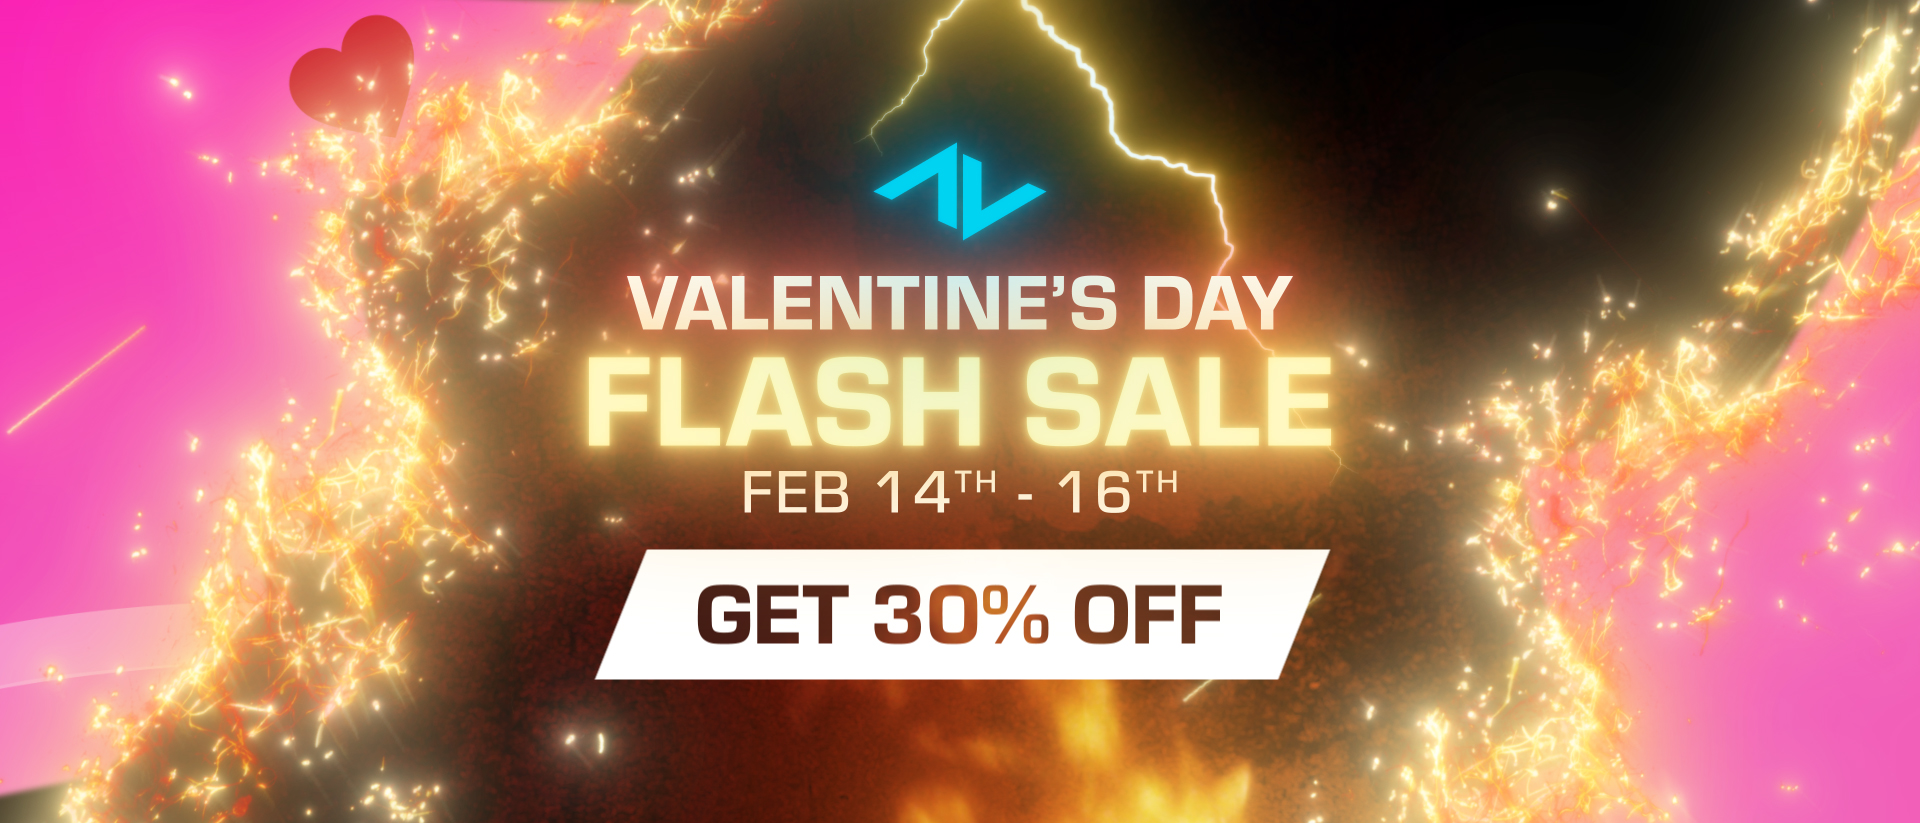 Valentine’s Day 2022 Flash Sale Announcement | 30% Off Sitewide for a Limited Time!